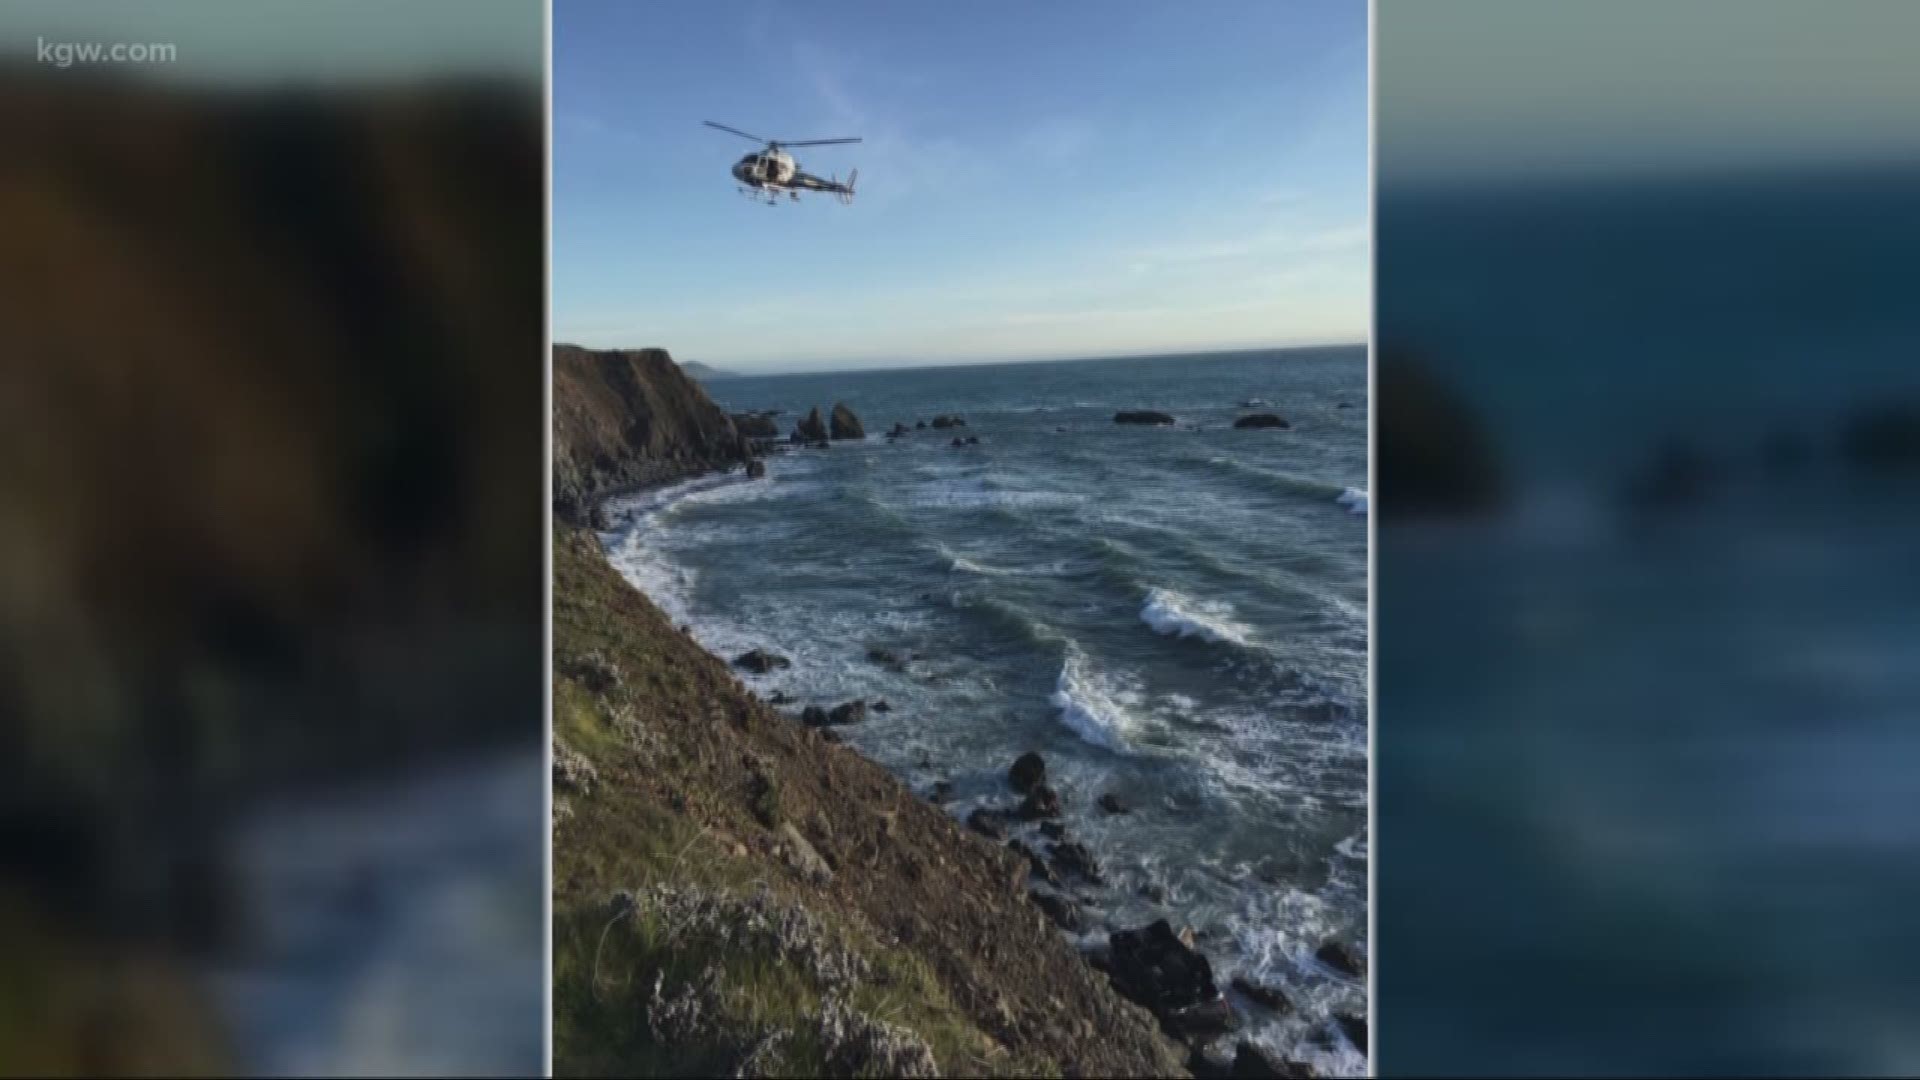 Search on for three more children in Calif. cliff crash